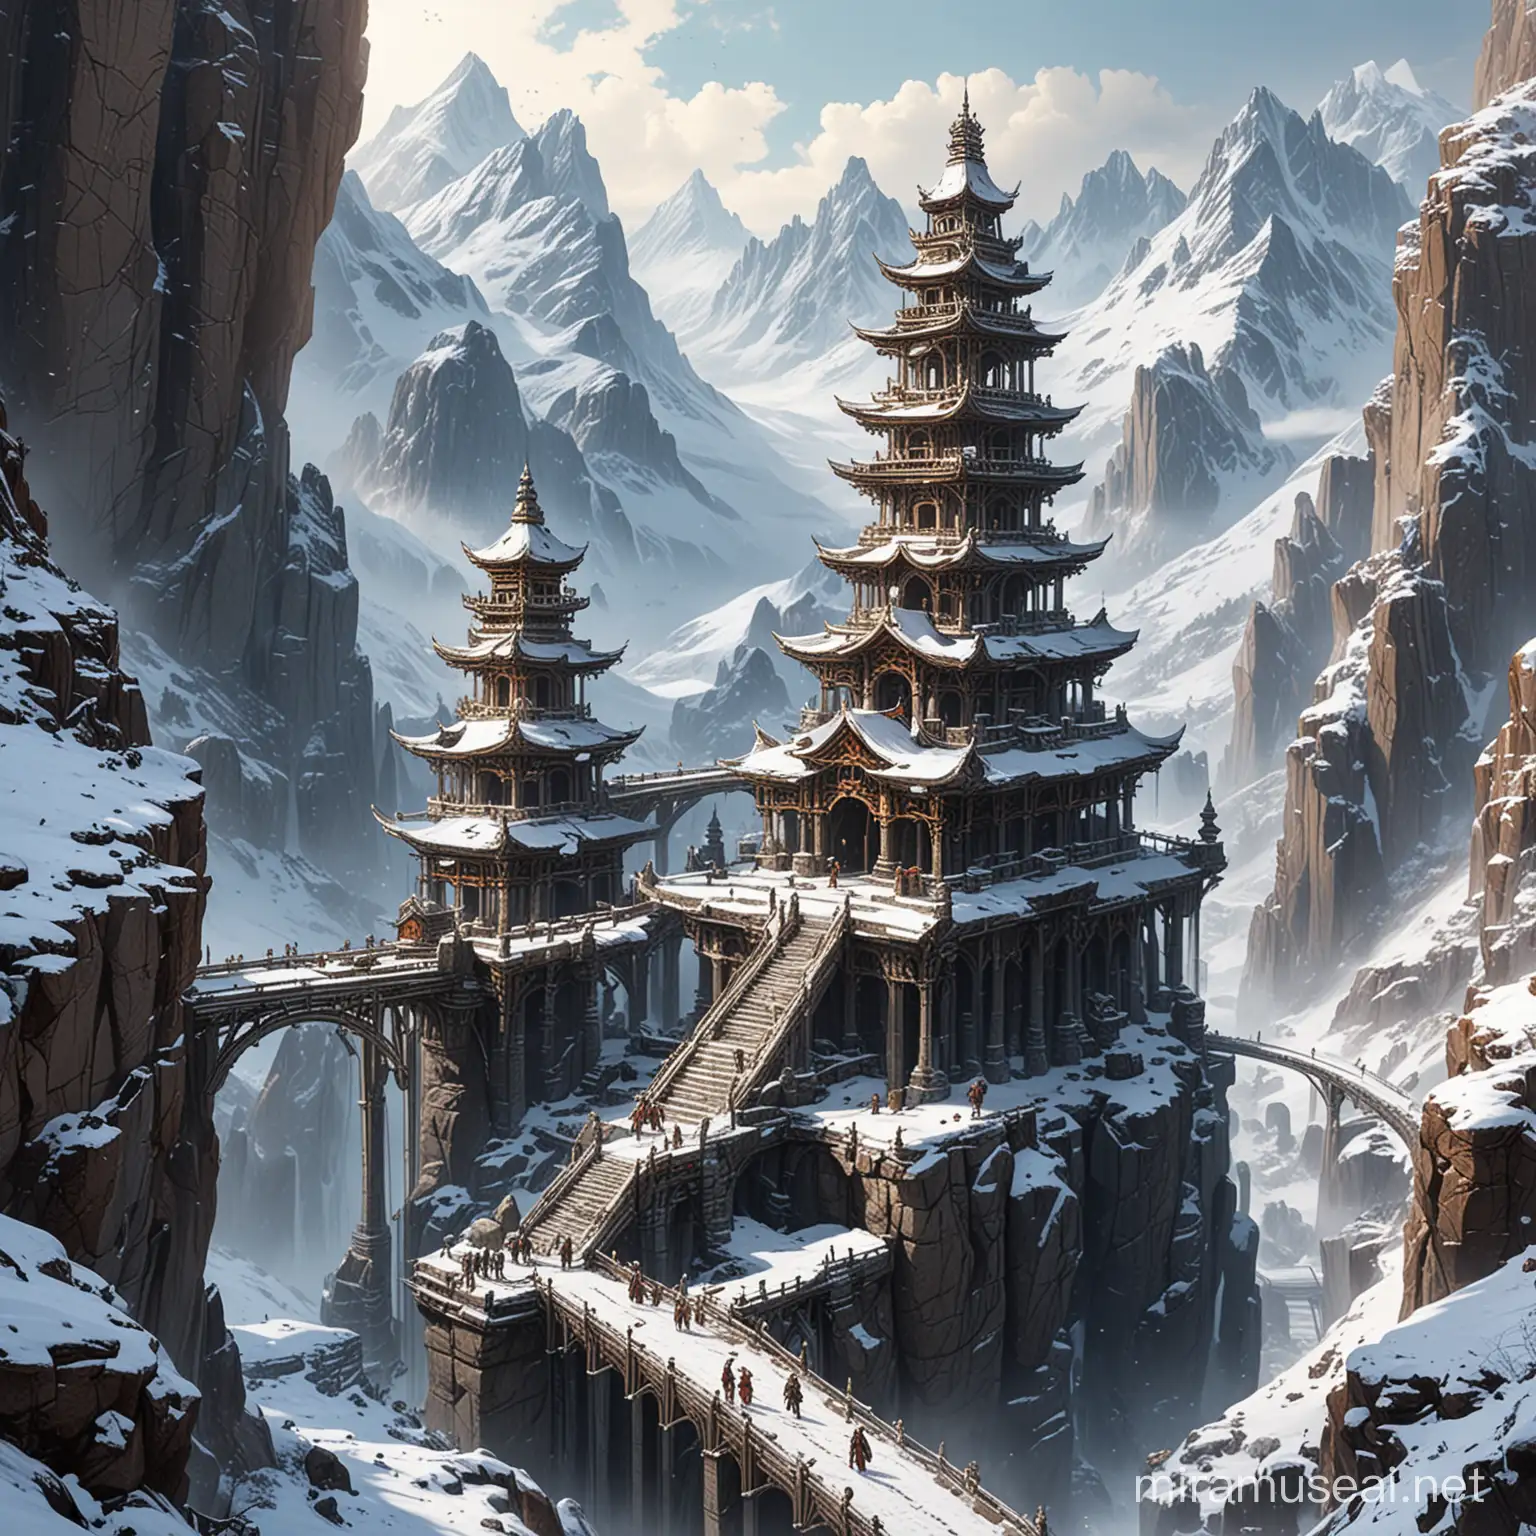 Snowy Dnd Mountain Temple with Three Towers and Suspended Bridges